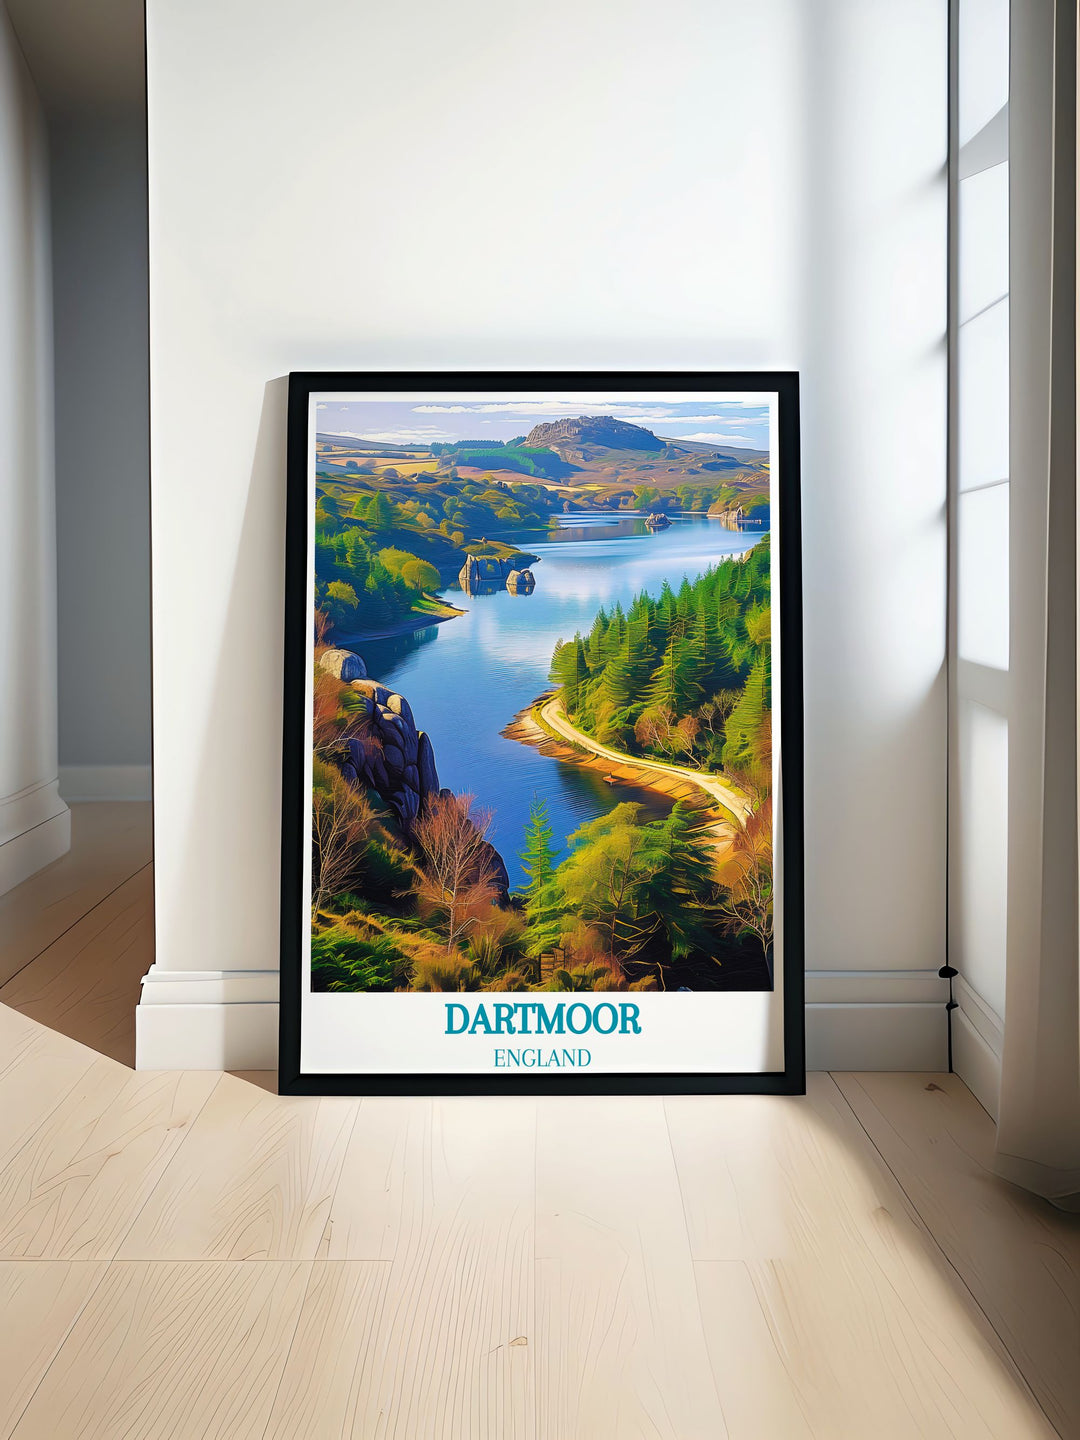 Framed art depicting the majestic scenery of Dartmoor National Park, capturing the wild beauty and historical significance of this iconic landscape.